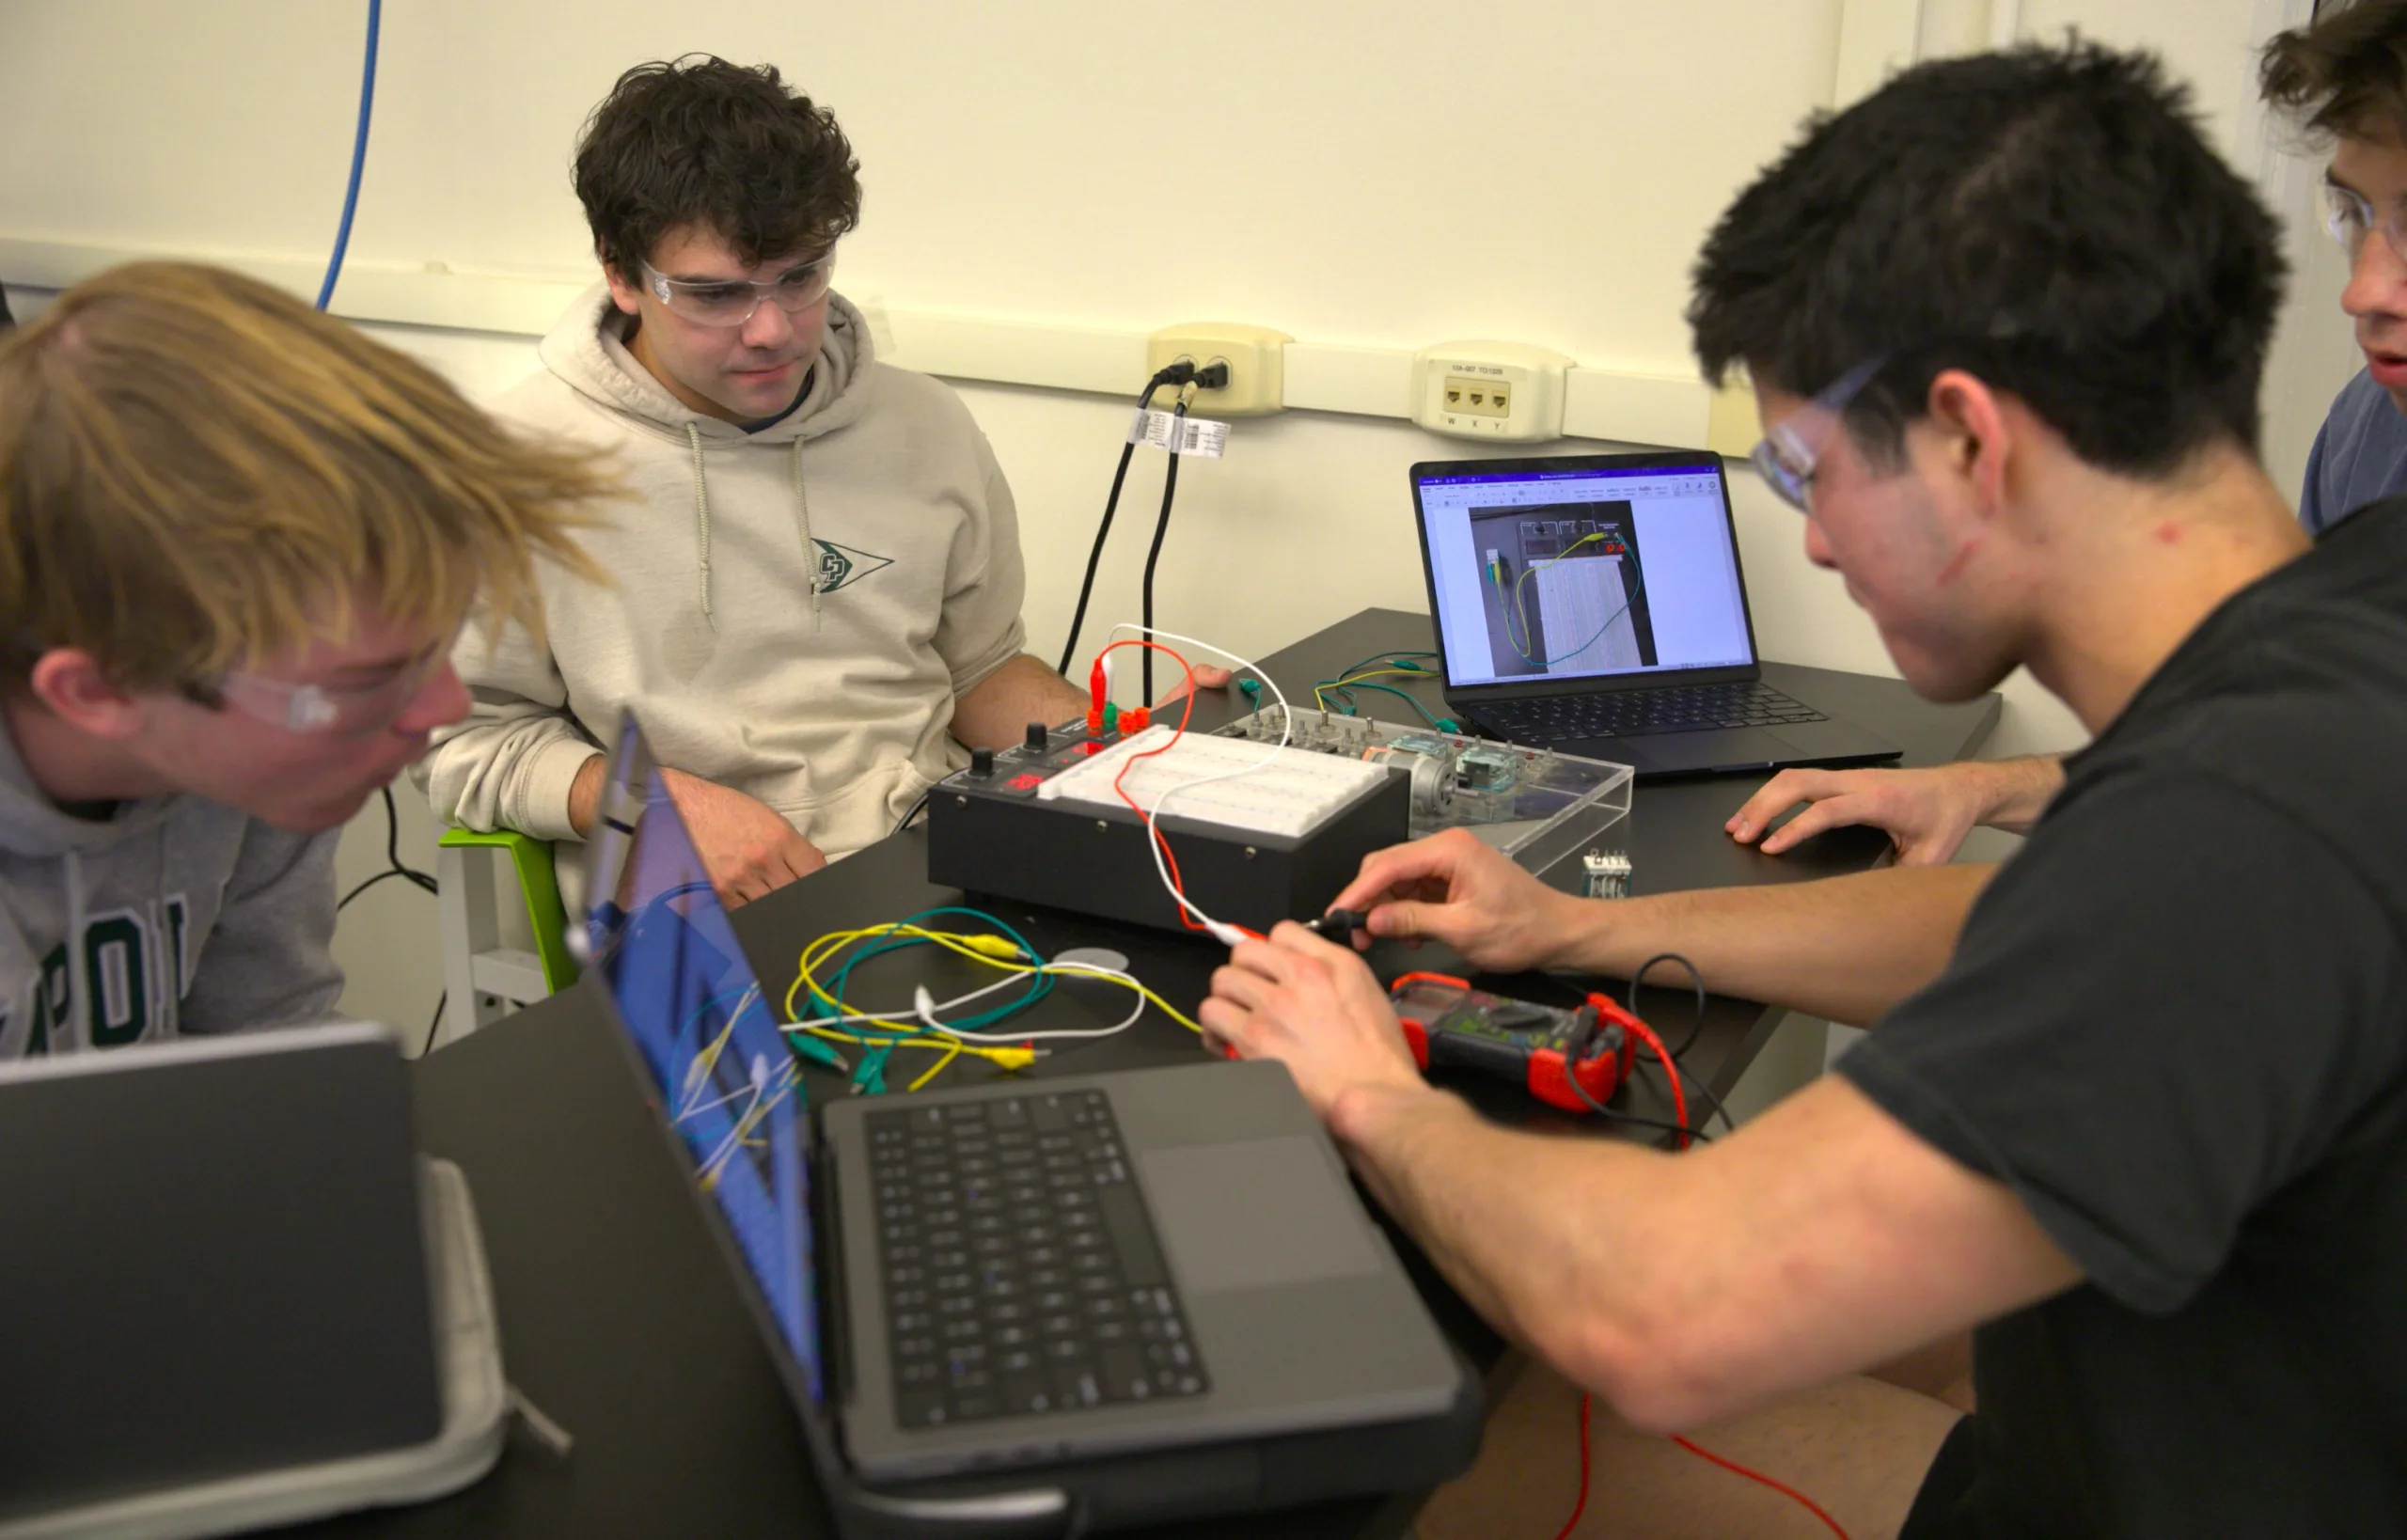 Students work on an electrical project